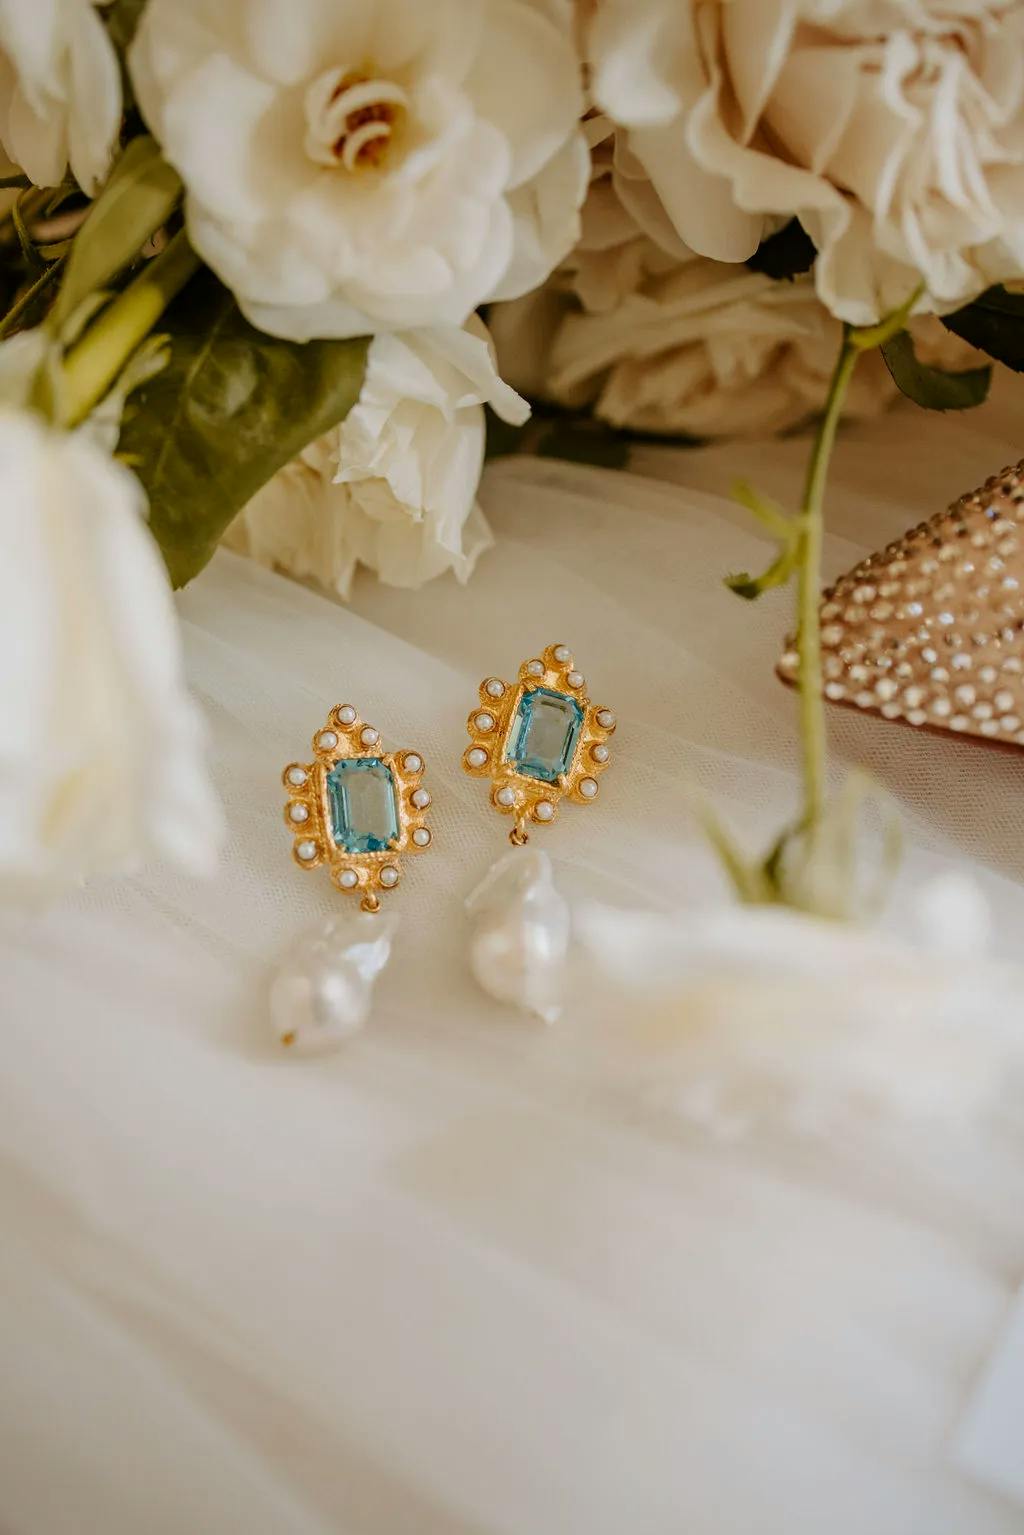 Blue topaz, pearl and gold wedding earrings